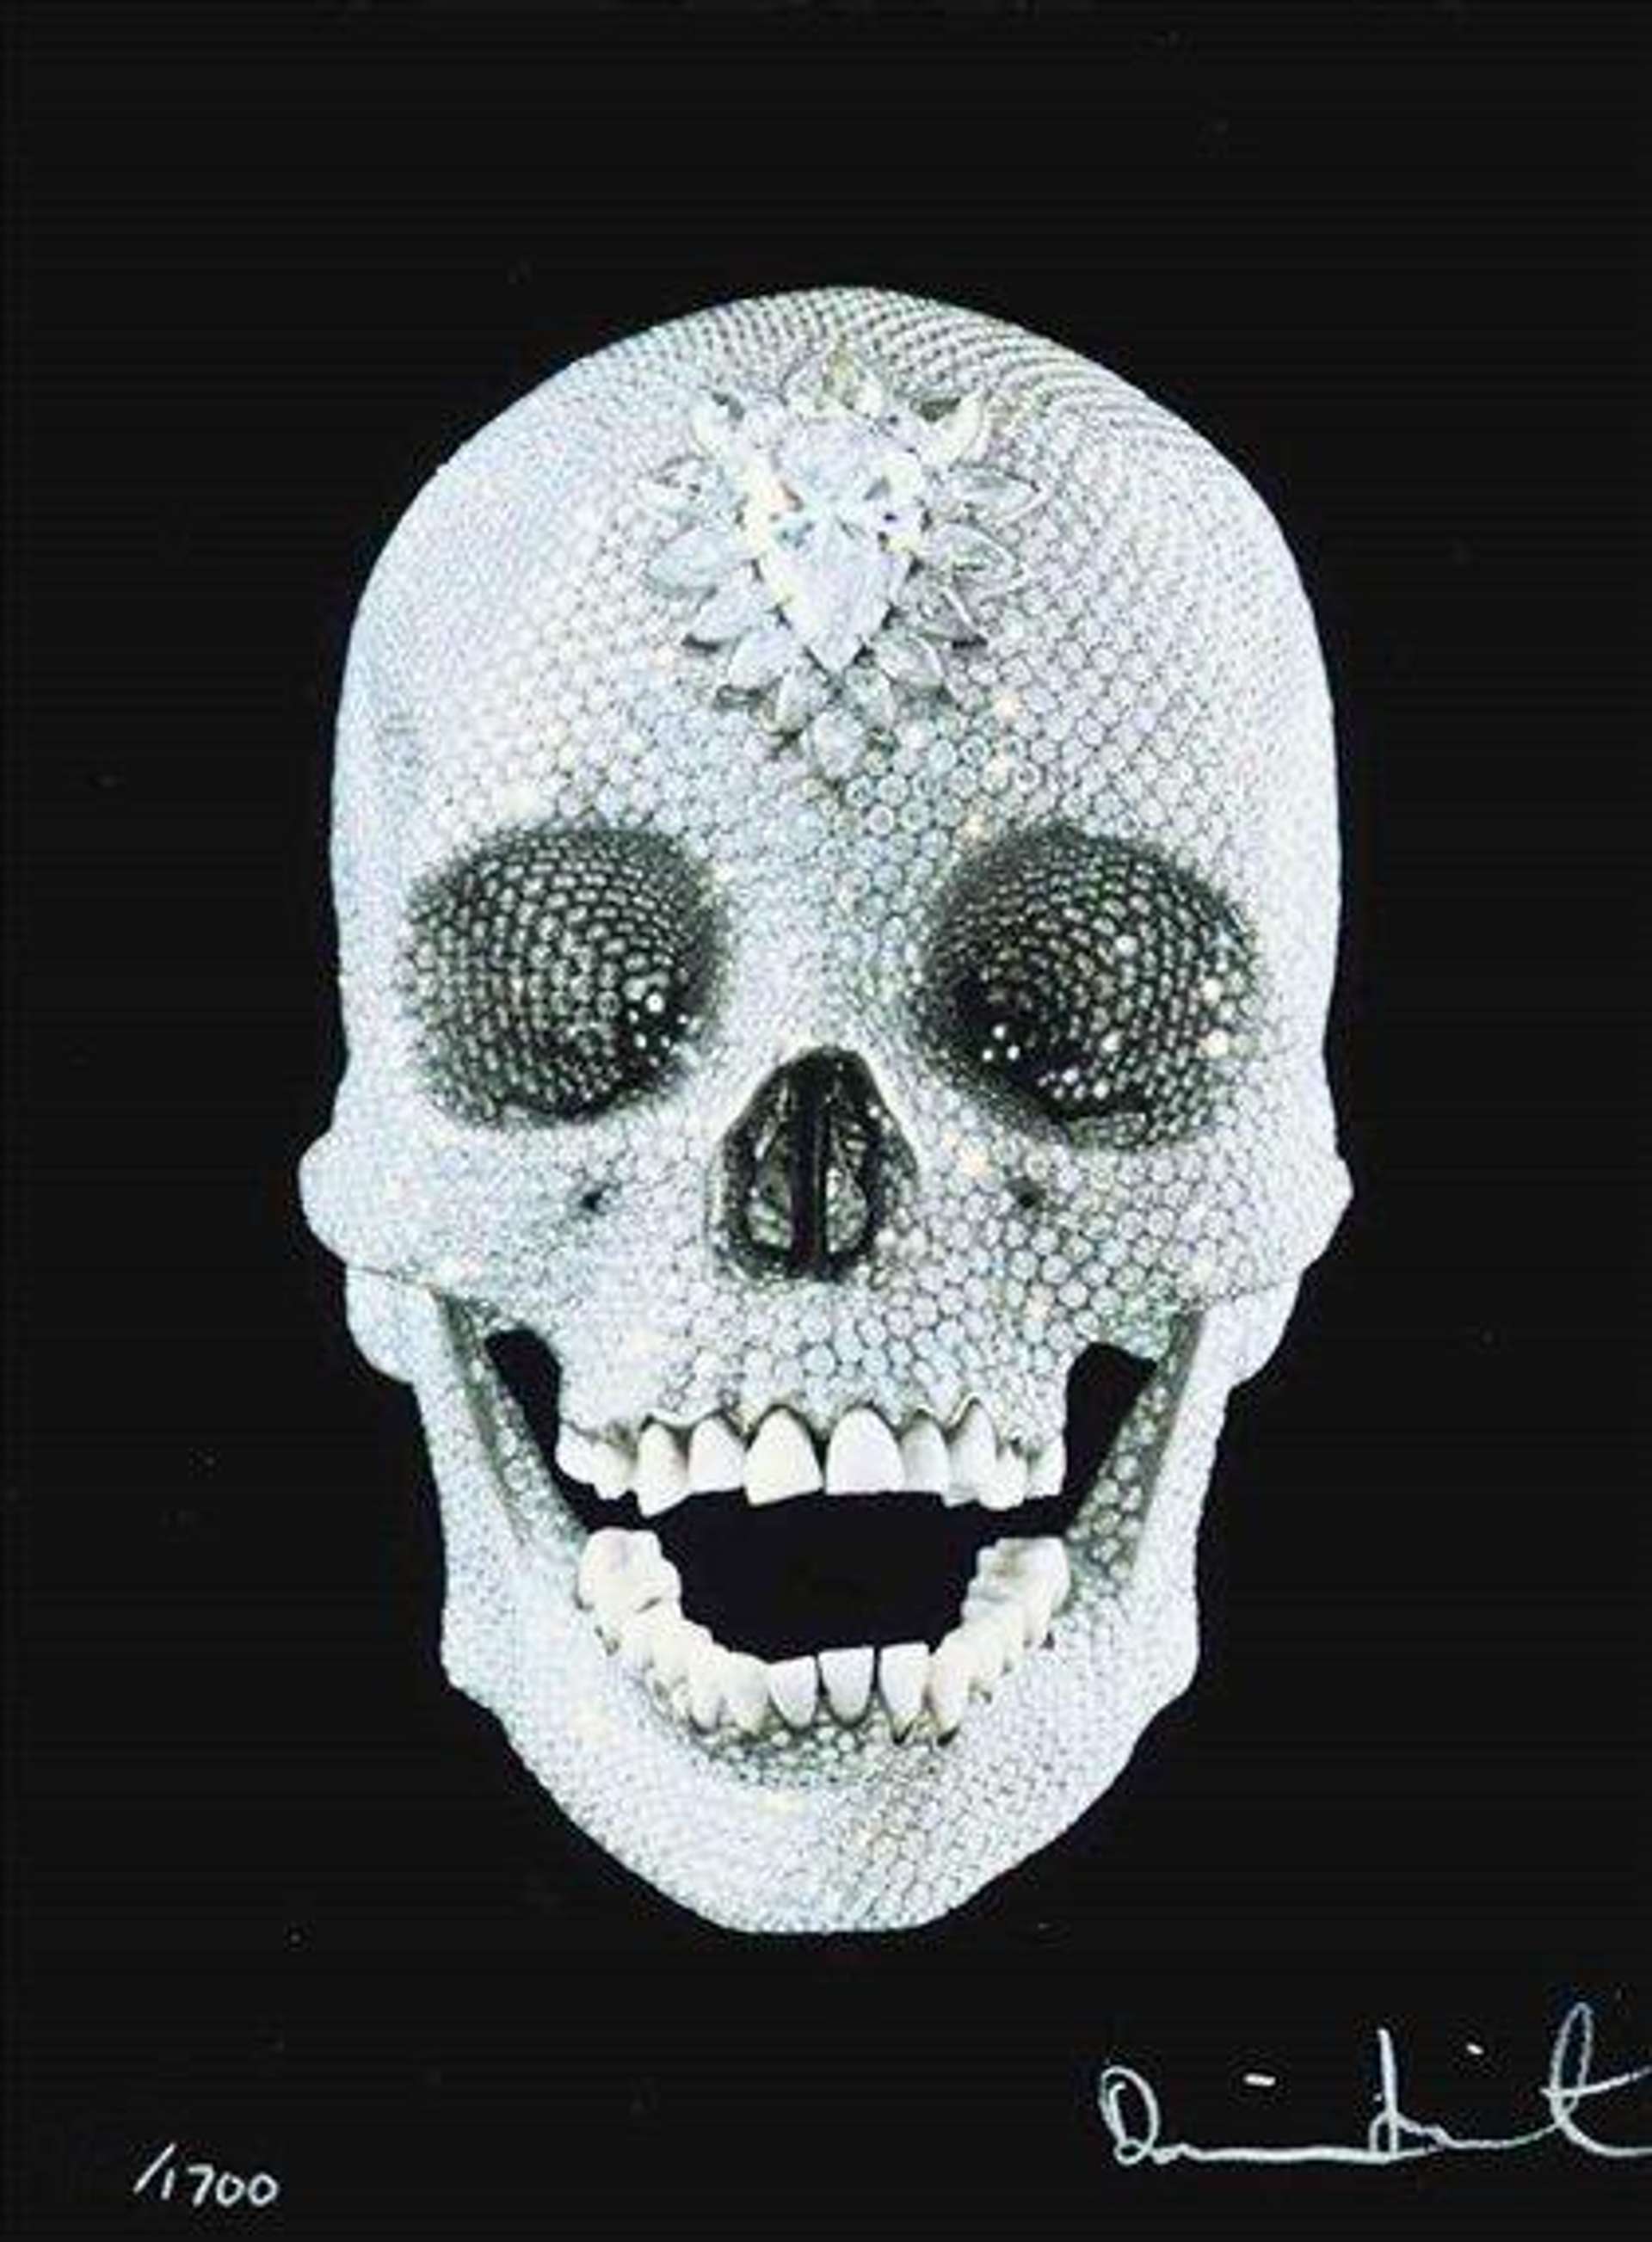 For the Love of God, Believe by Damien Hirst